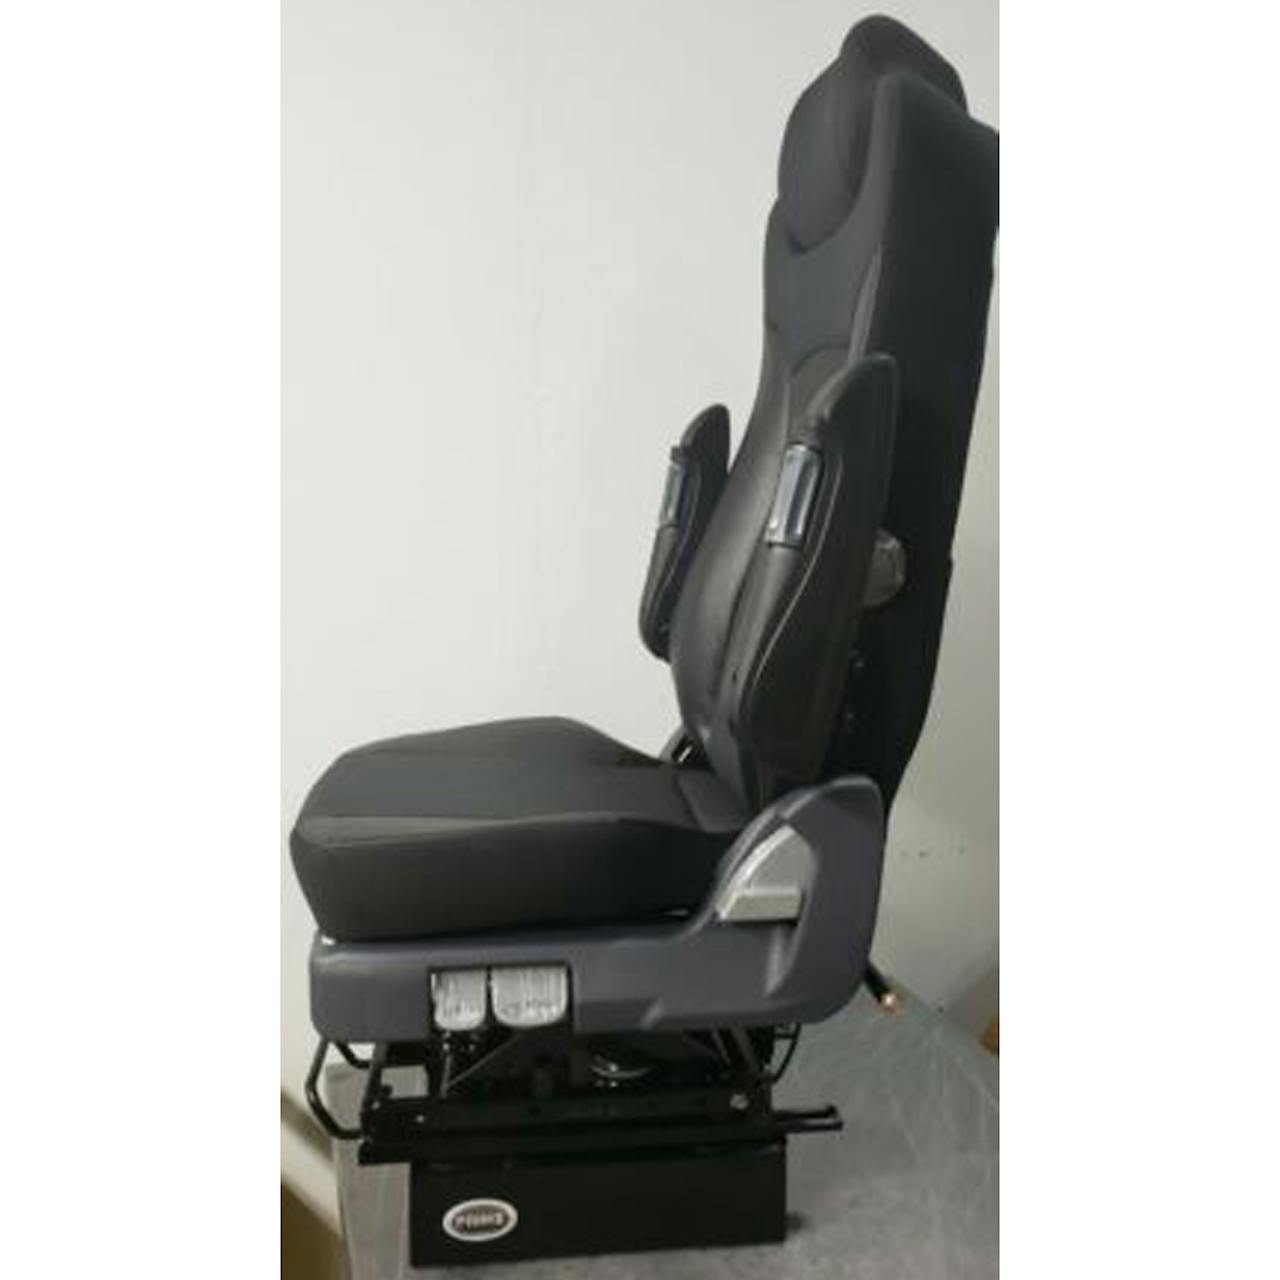 Prime TC400 Series Air Ride SEATS by Prime Seating